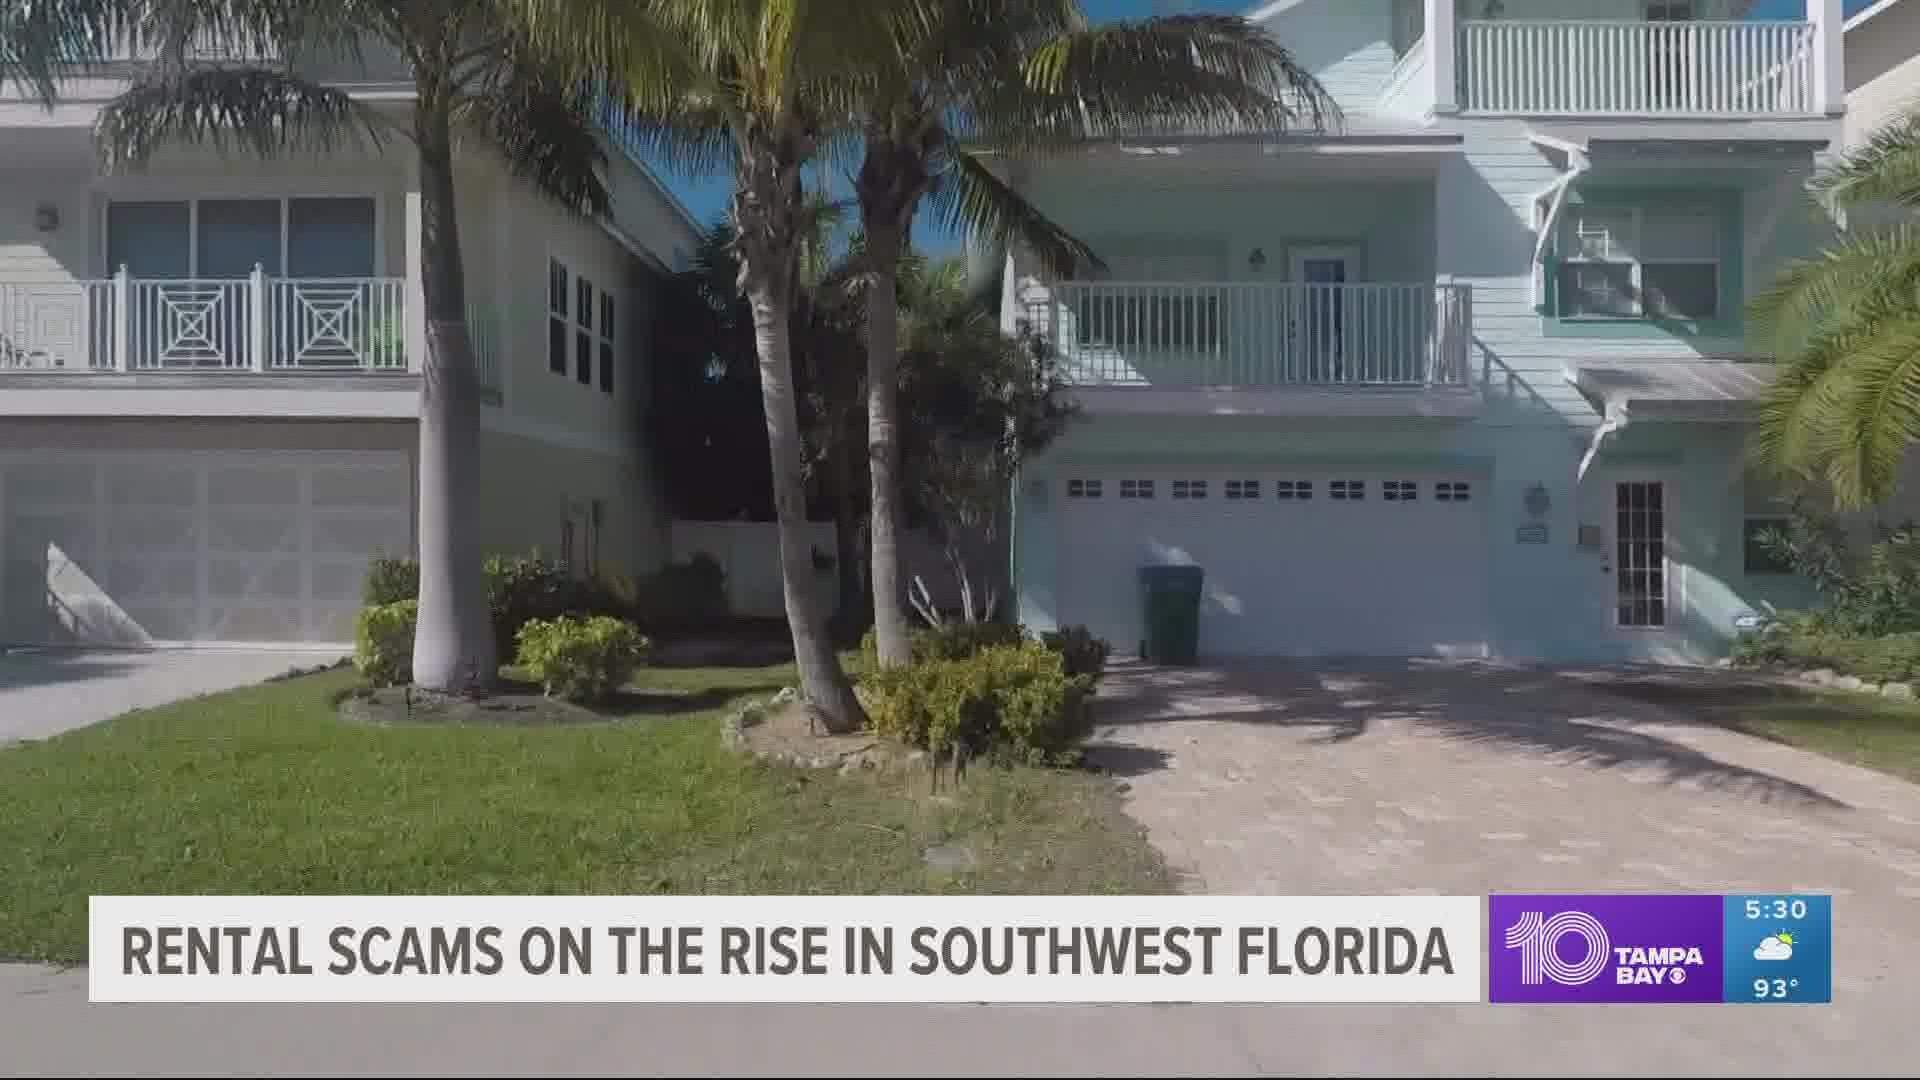 It’s no secret the Florida housing market is hot. People are scrambling to find places to buy and rent.